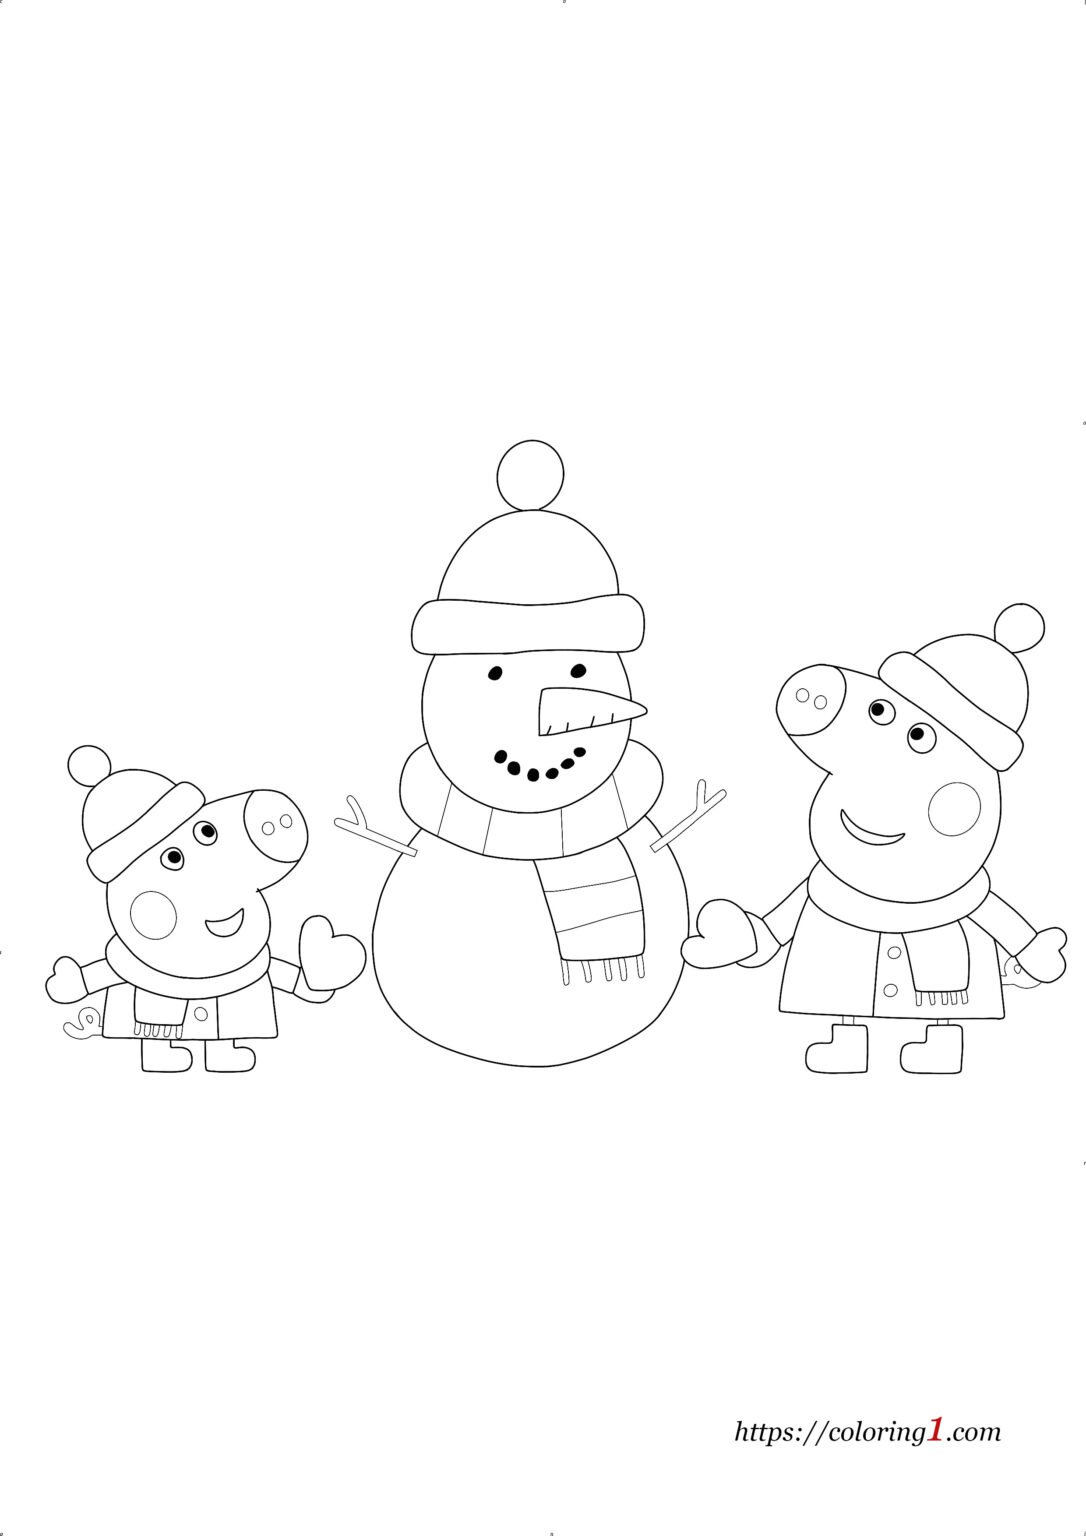 Peppa Pig and Snowman Coloring Pages - 2 Free Coloring Sheets (2021)